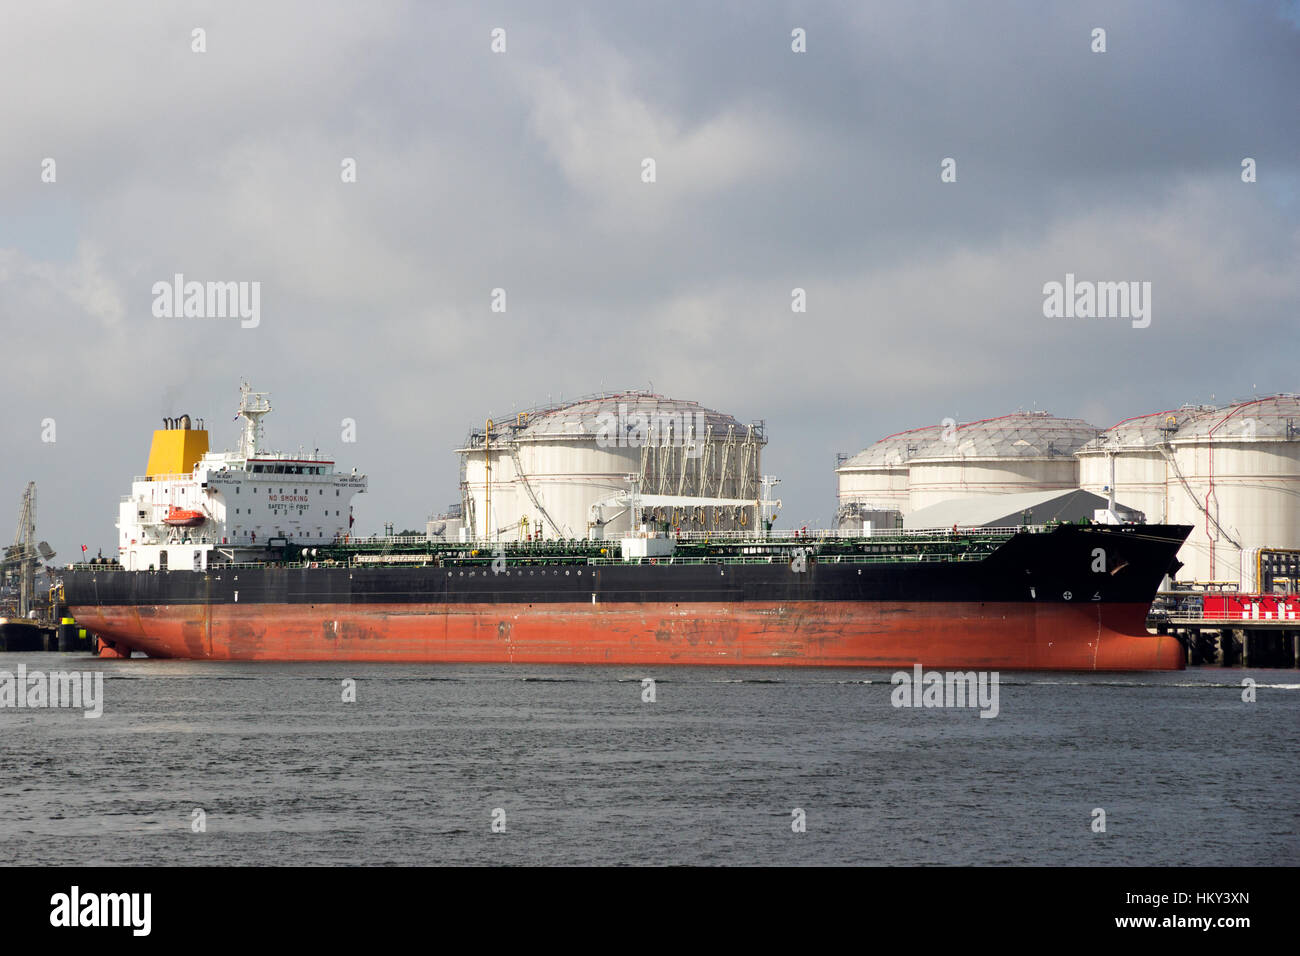 Oil tanker moored at an oil terminal. Stock Photo